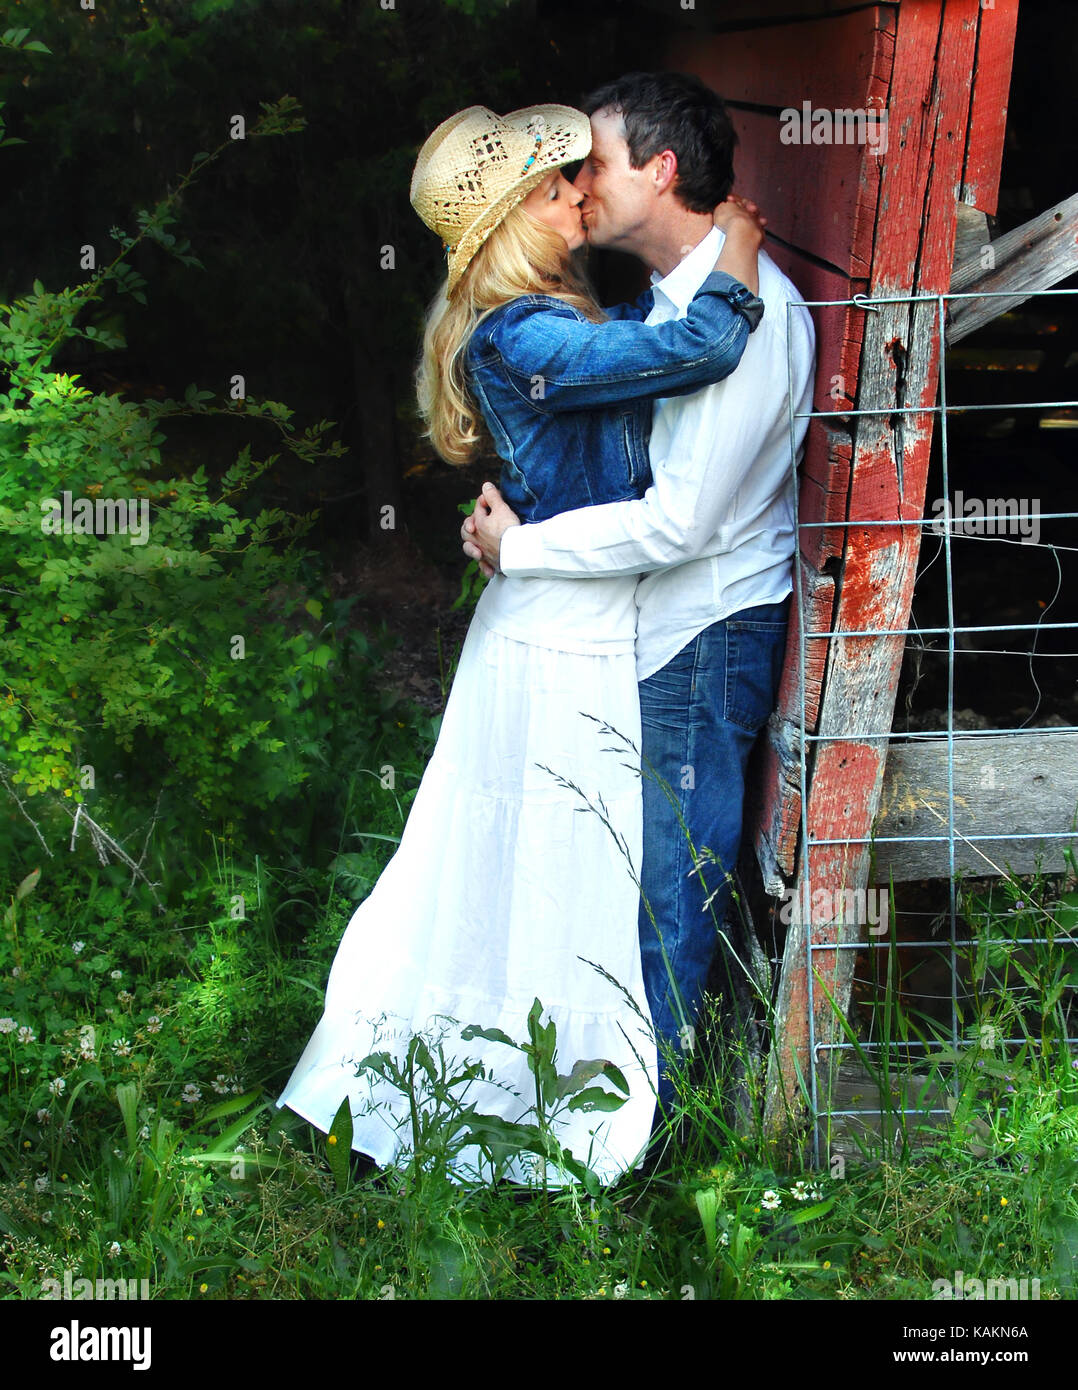 Young couple embrace behind the barn.  She is wearing a white dress with cowboy hat.  He is wearing jeans and a white shirtl Stock Photo